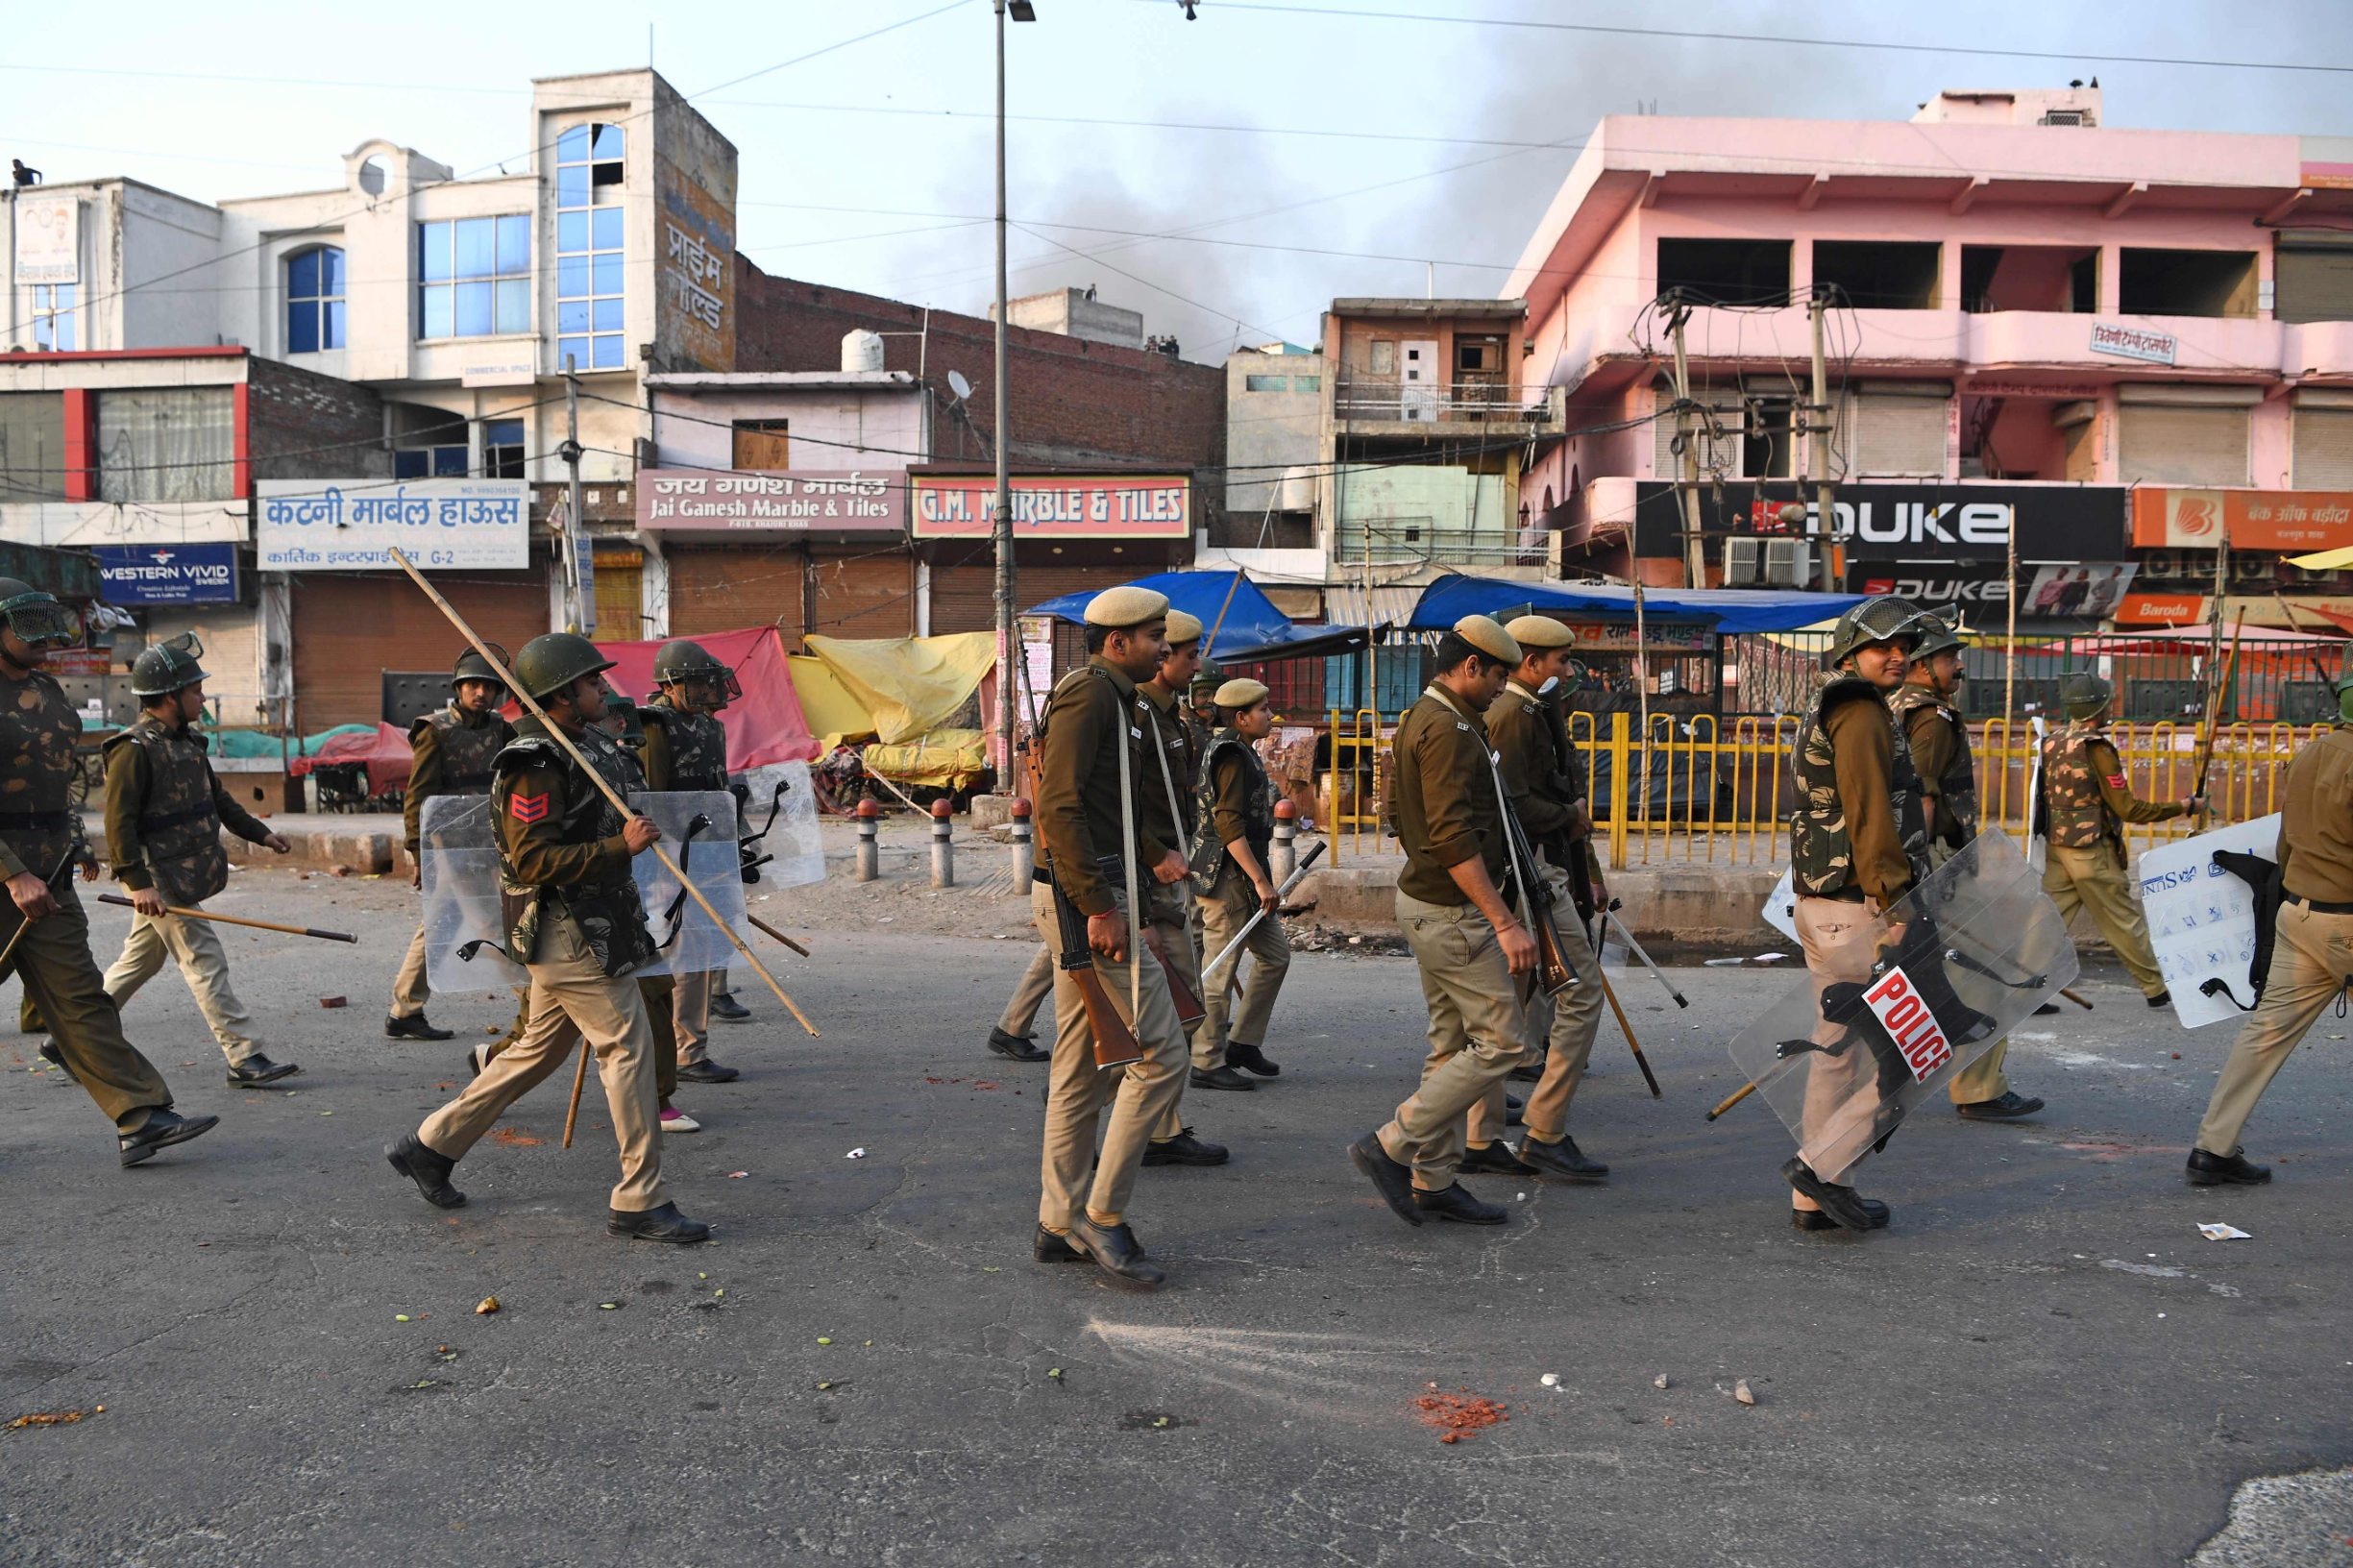 Policemen march as they patrol a road following clashes between supporters and opponents of a new citizenship law, at Bhajanpura area of New Delhi on February 24, 2020, ahead of US President arrival in New Delhi. - Fresh clashes raged in New Delhi in protests over a contentious citizenship law on February 24, hours ahead of a visit to the Indian capital by US President Donald Trump. India has seen weeks of demonstrations and violence since a new citizenship law -- that critics say discriminates against Muslims -- came into force in December. (Photo by Sajjad  HUSSAIN / AFP)